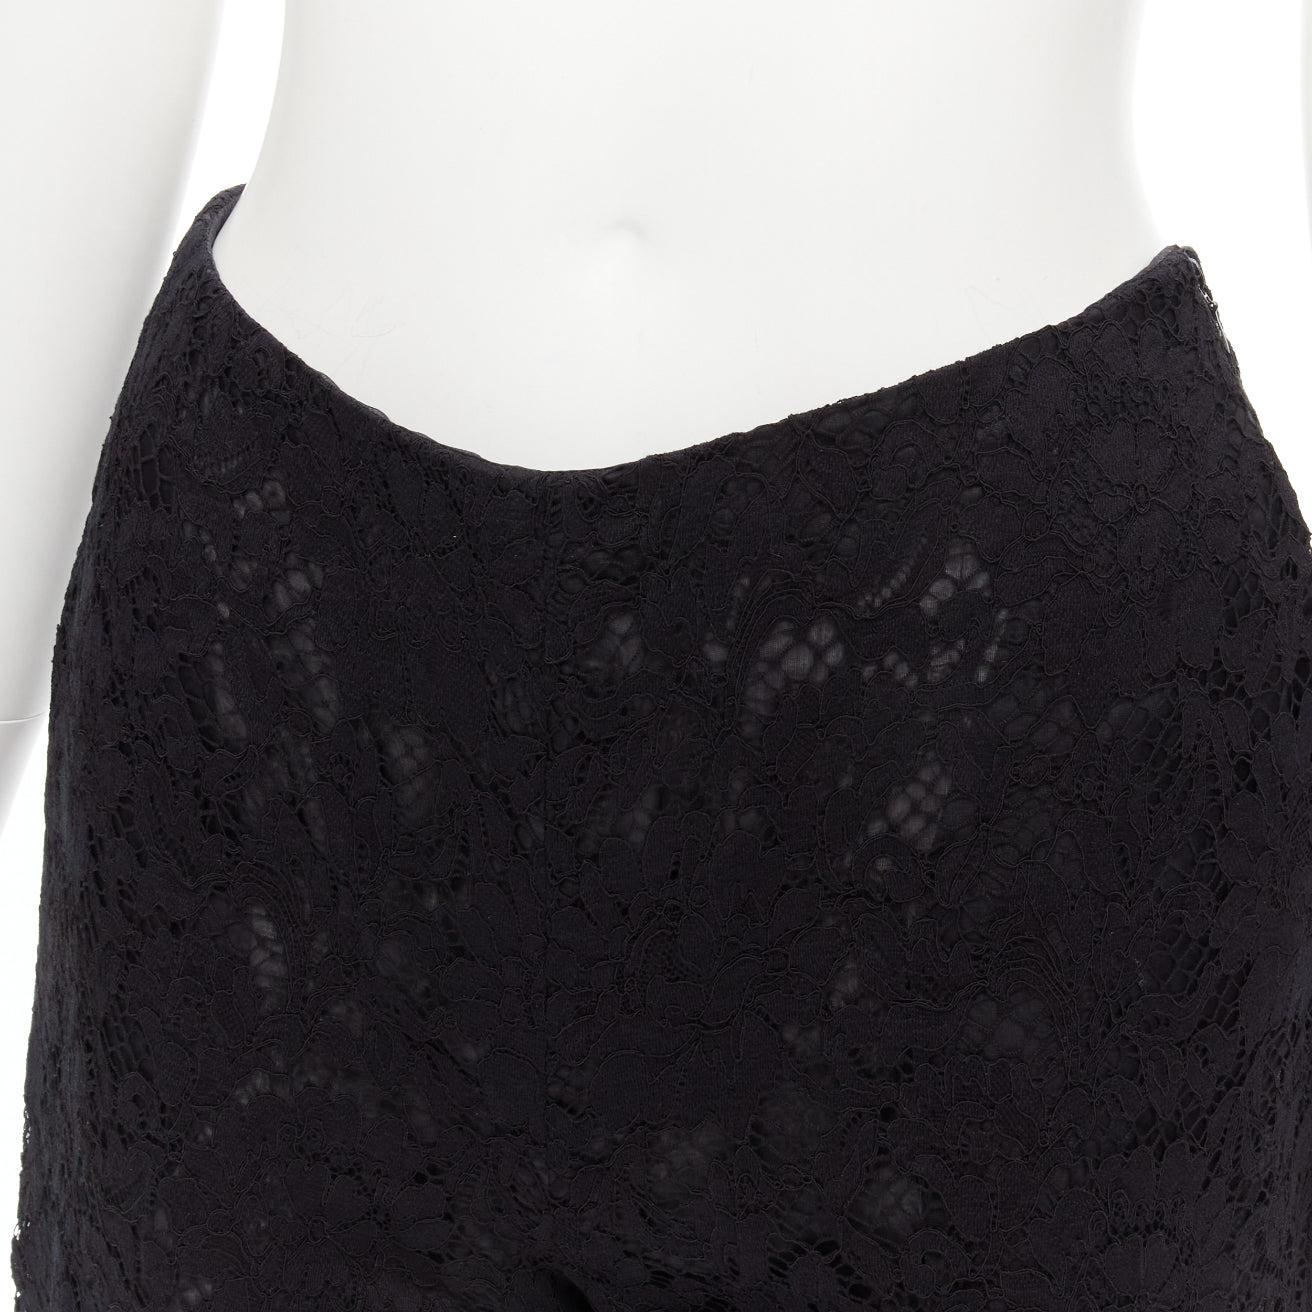 VALENTINO black floral lace knee length culotte shorts IT38 XS
Reference: MELK/A00069
Brand: Valentino
Designer: Pier Paolo Piccioli
Material: Lace
Color: Black
Pattern: Solid
Closure: Zip
Extra Details: Dual side pockets.
Made in: